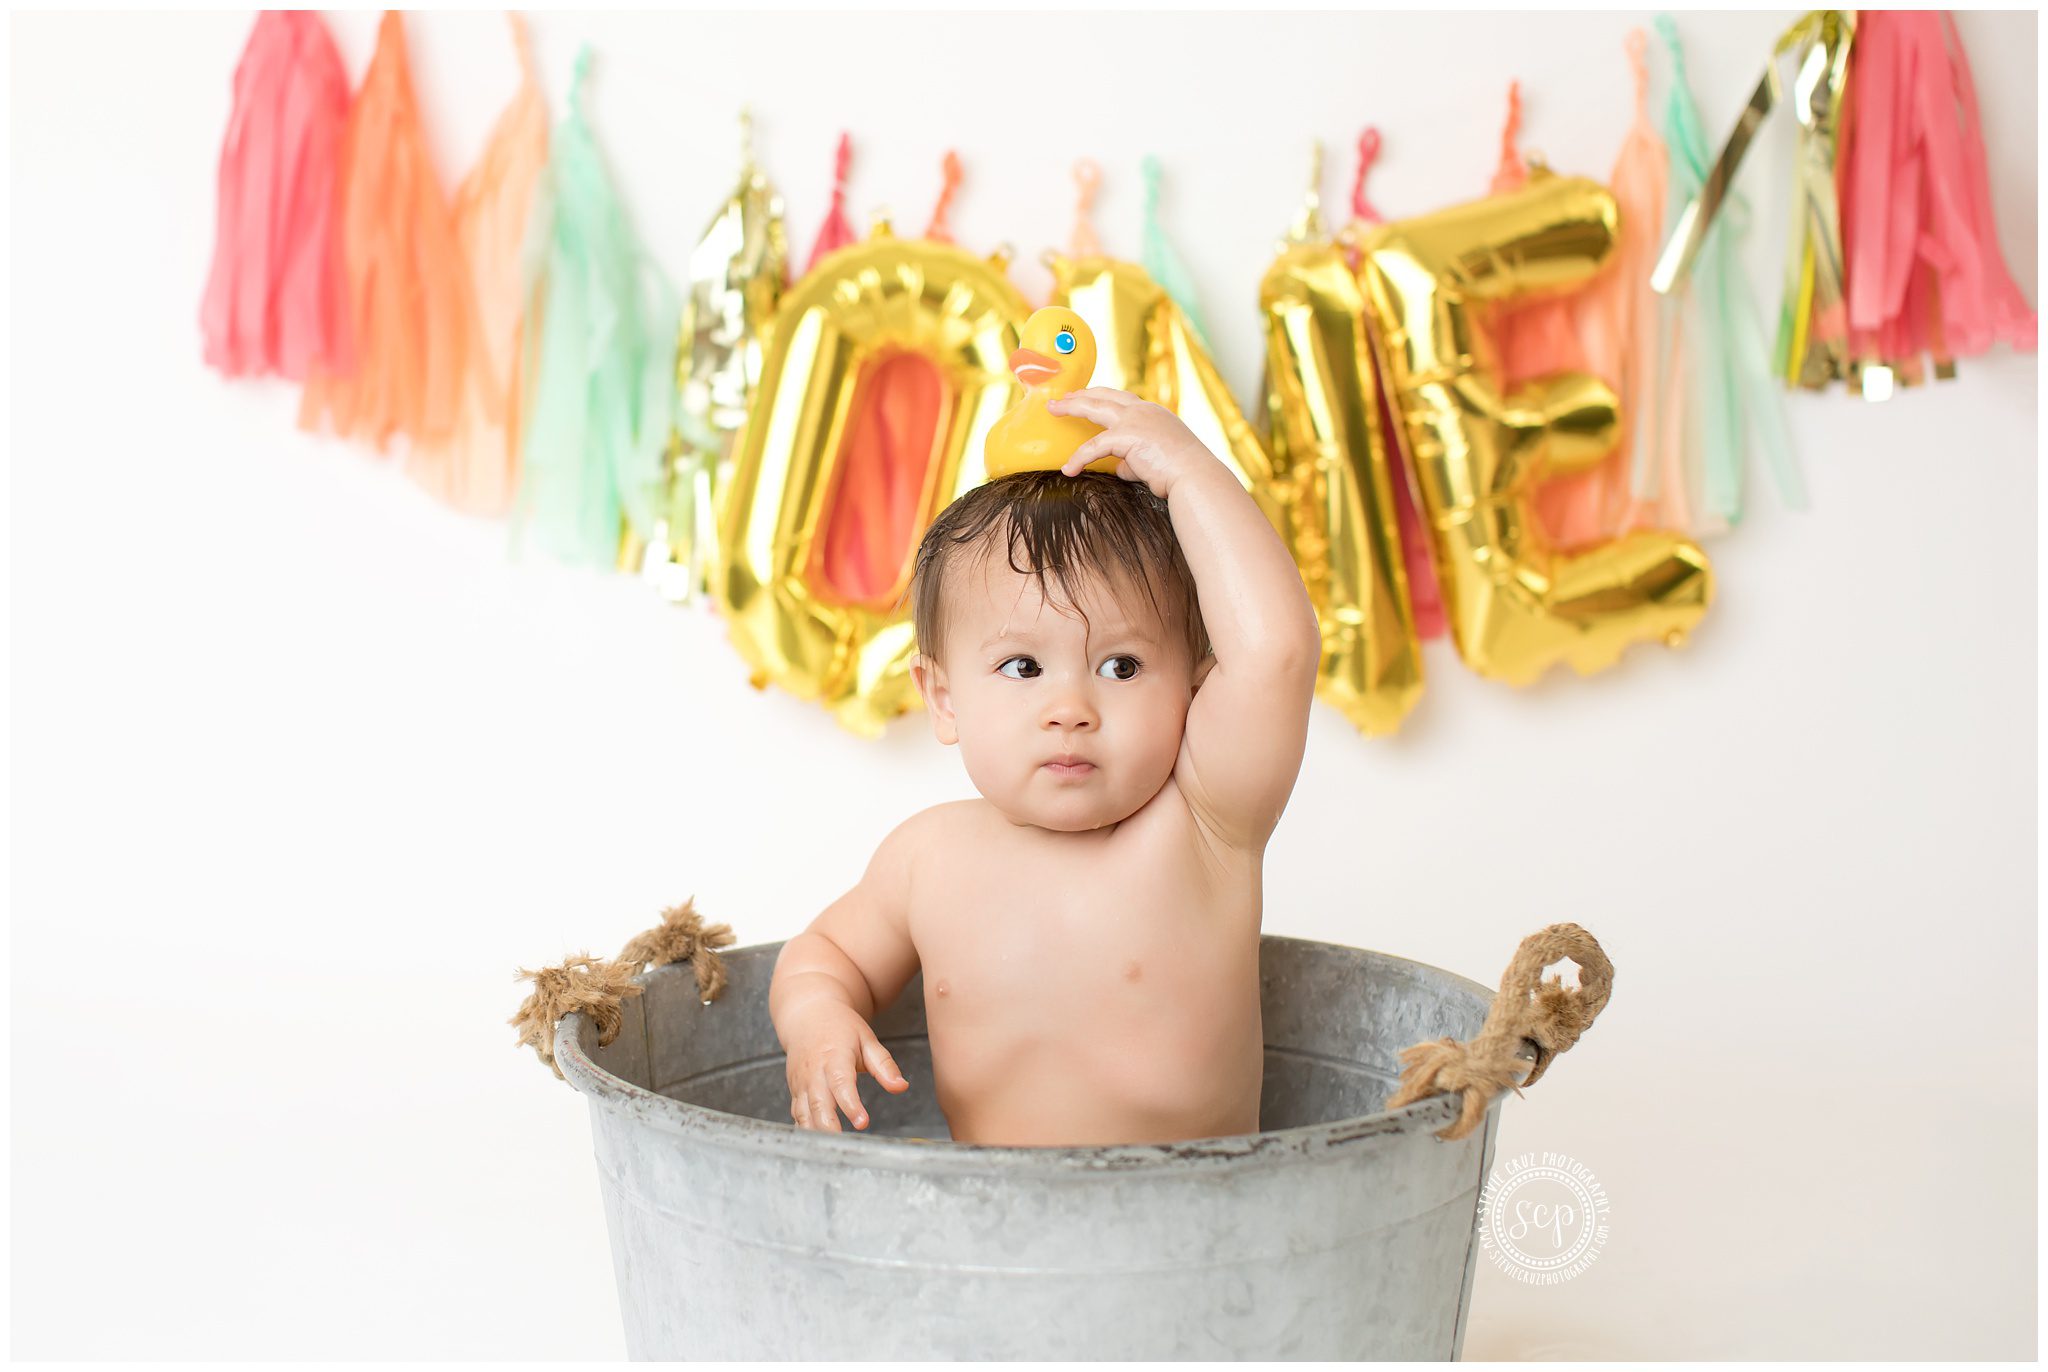 Rubber ducky cake smash and splash photo session to celebrate baby girl one year old birthday 